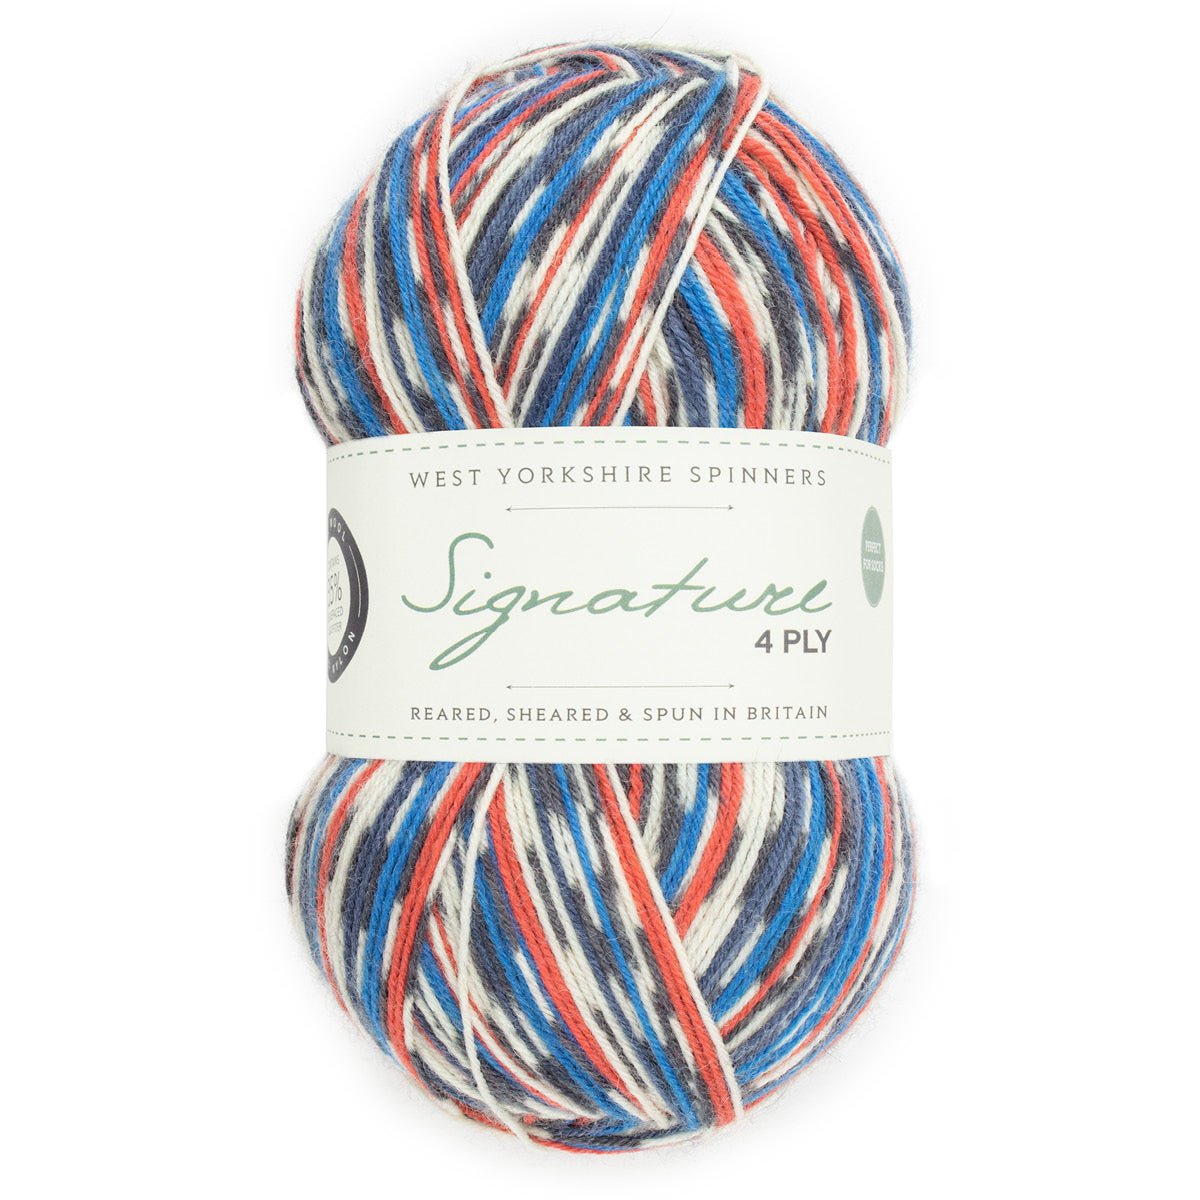 SIGNATURE 4PLY - COUNTRY BIRDS 1168-Swallow - West Yorkshire Spinners